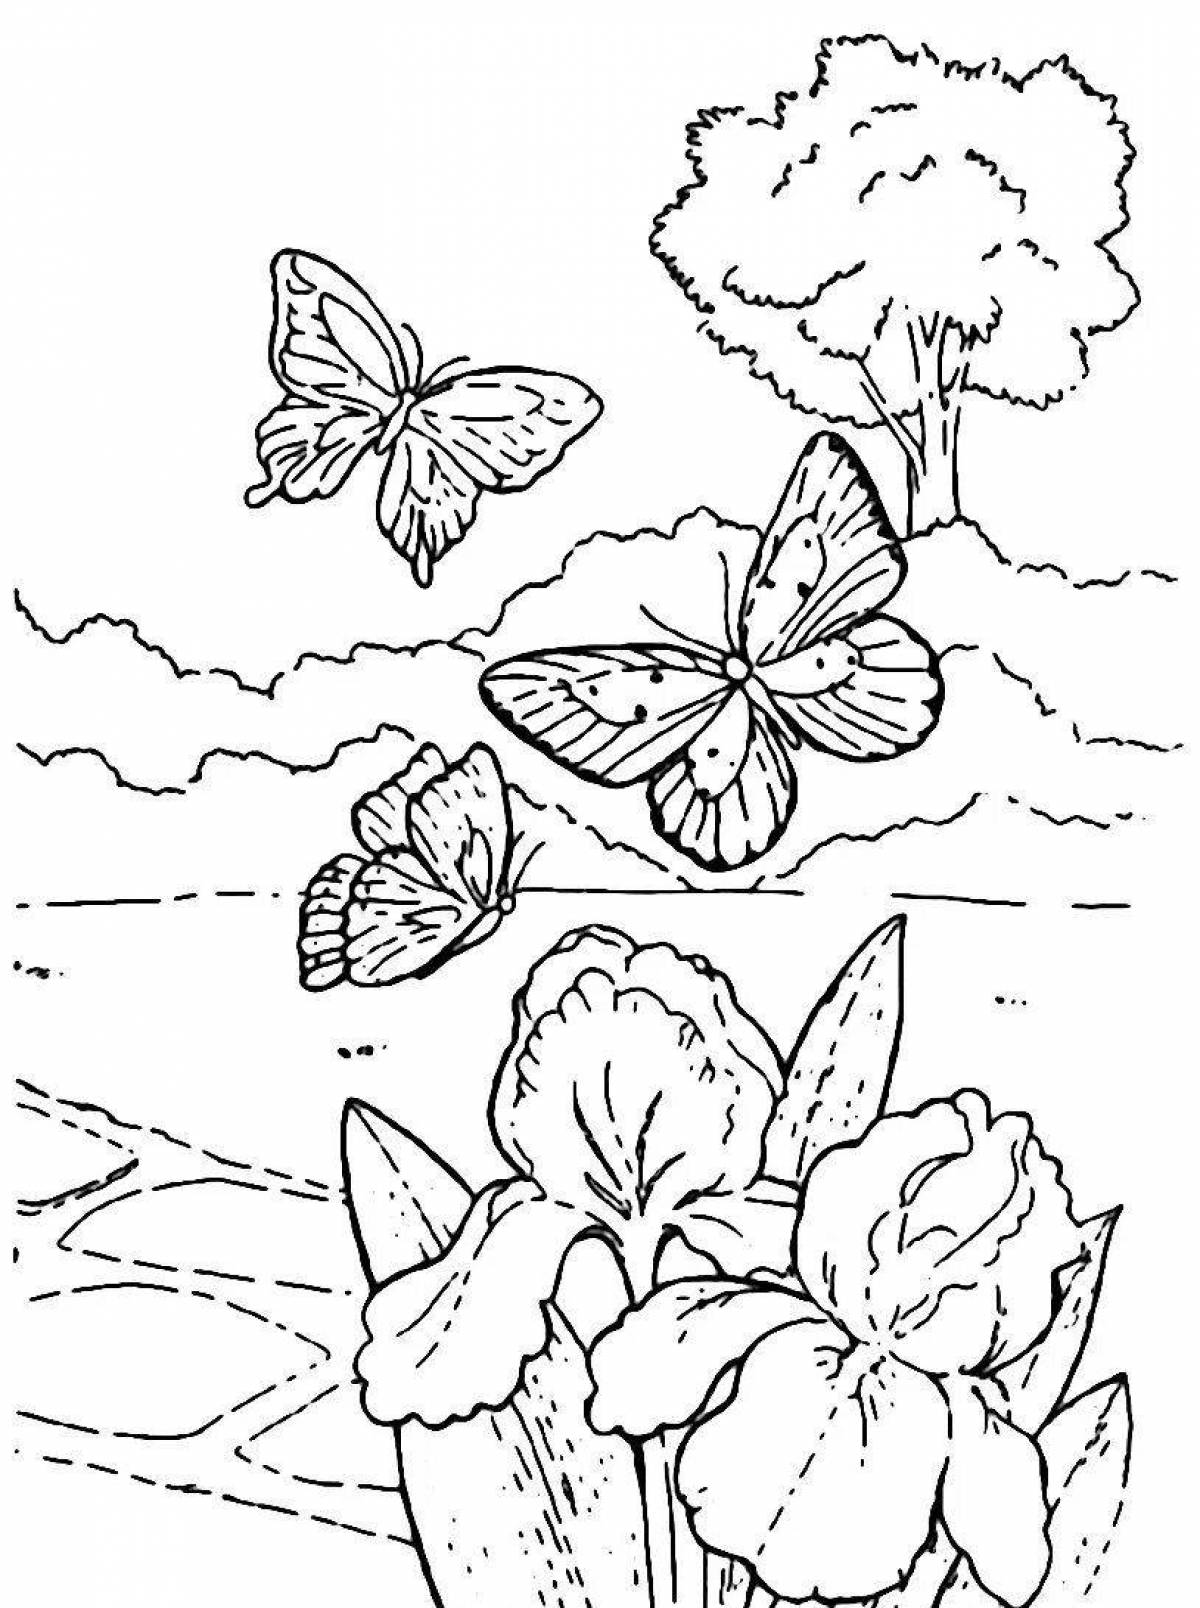 Amazing nature coloring book for 7 year olds